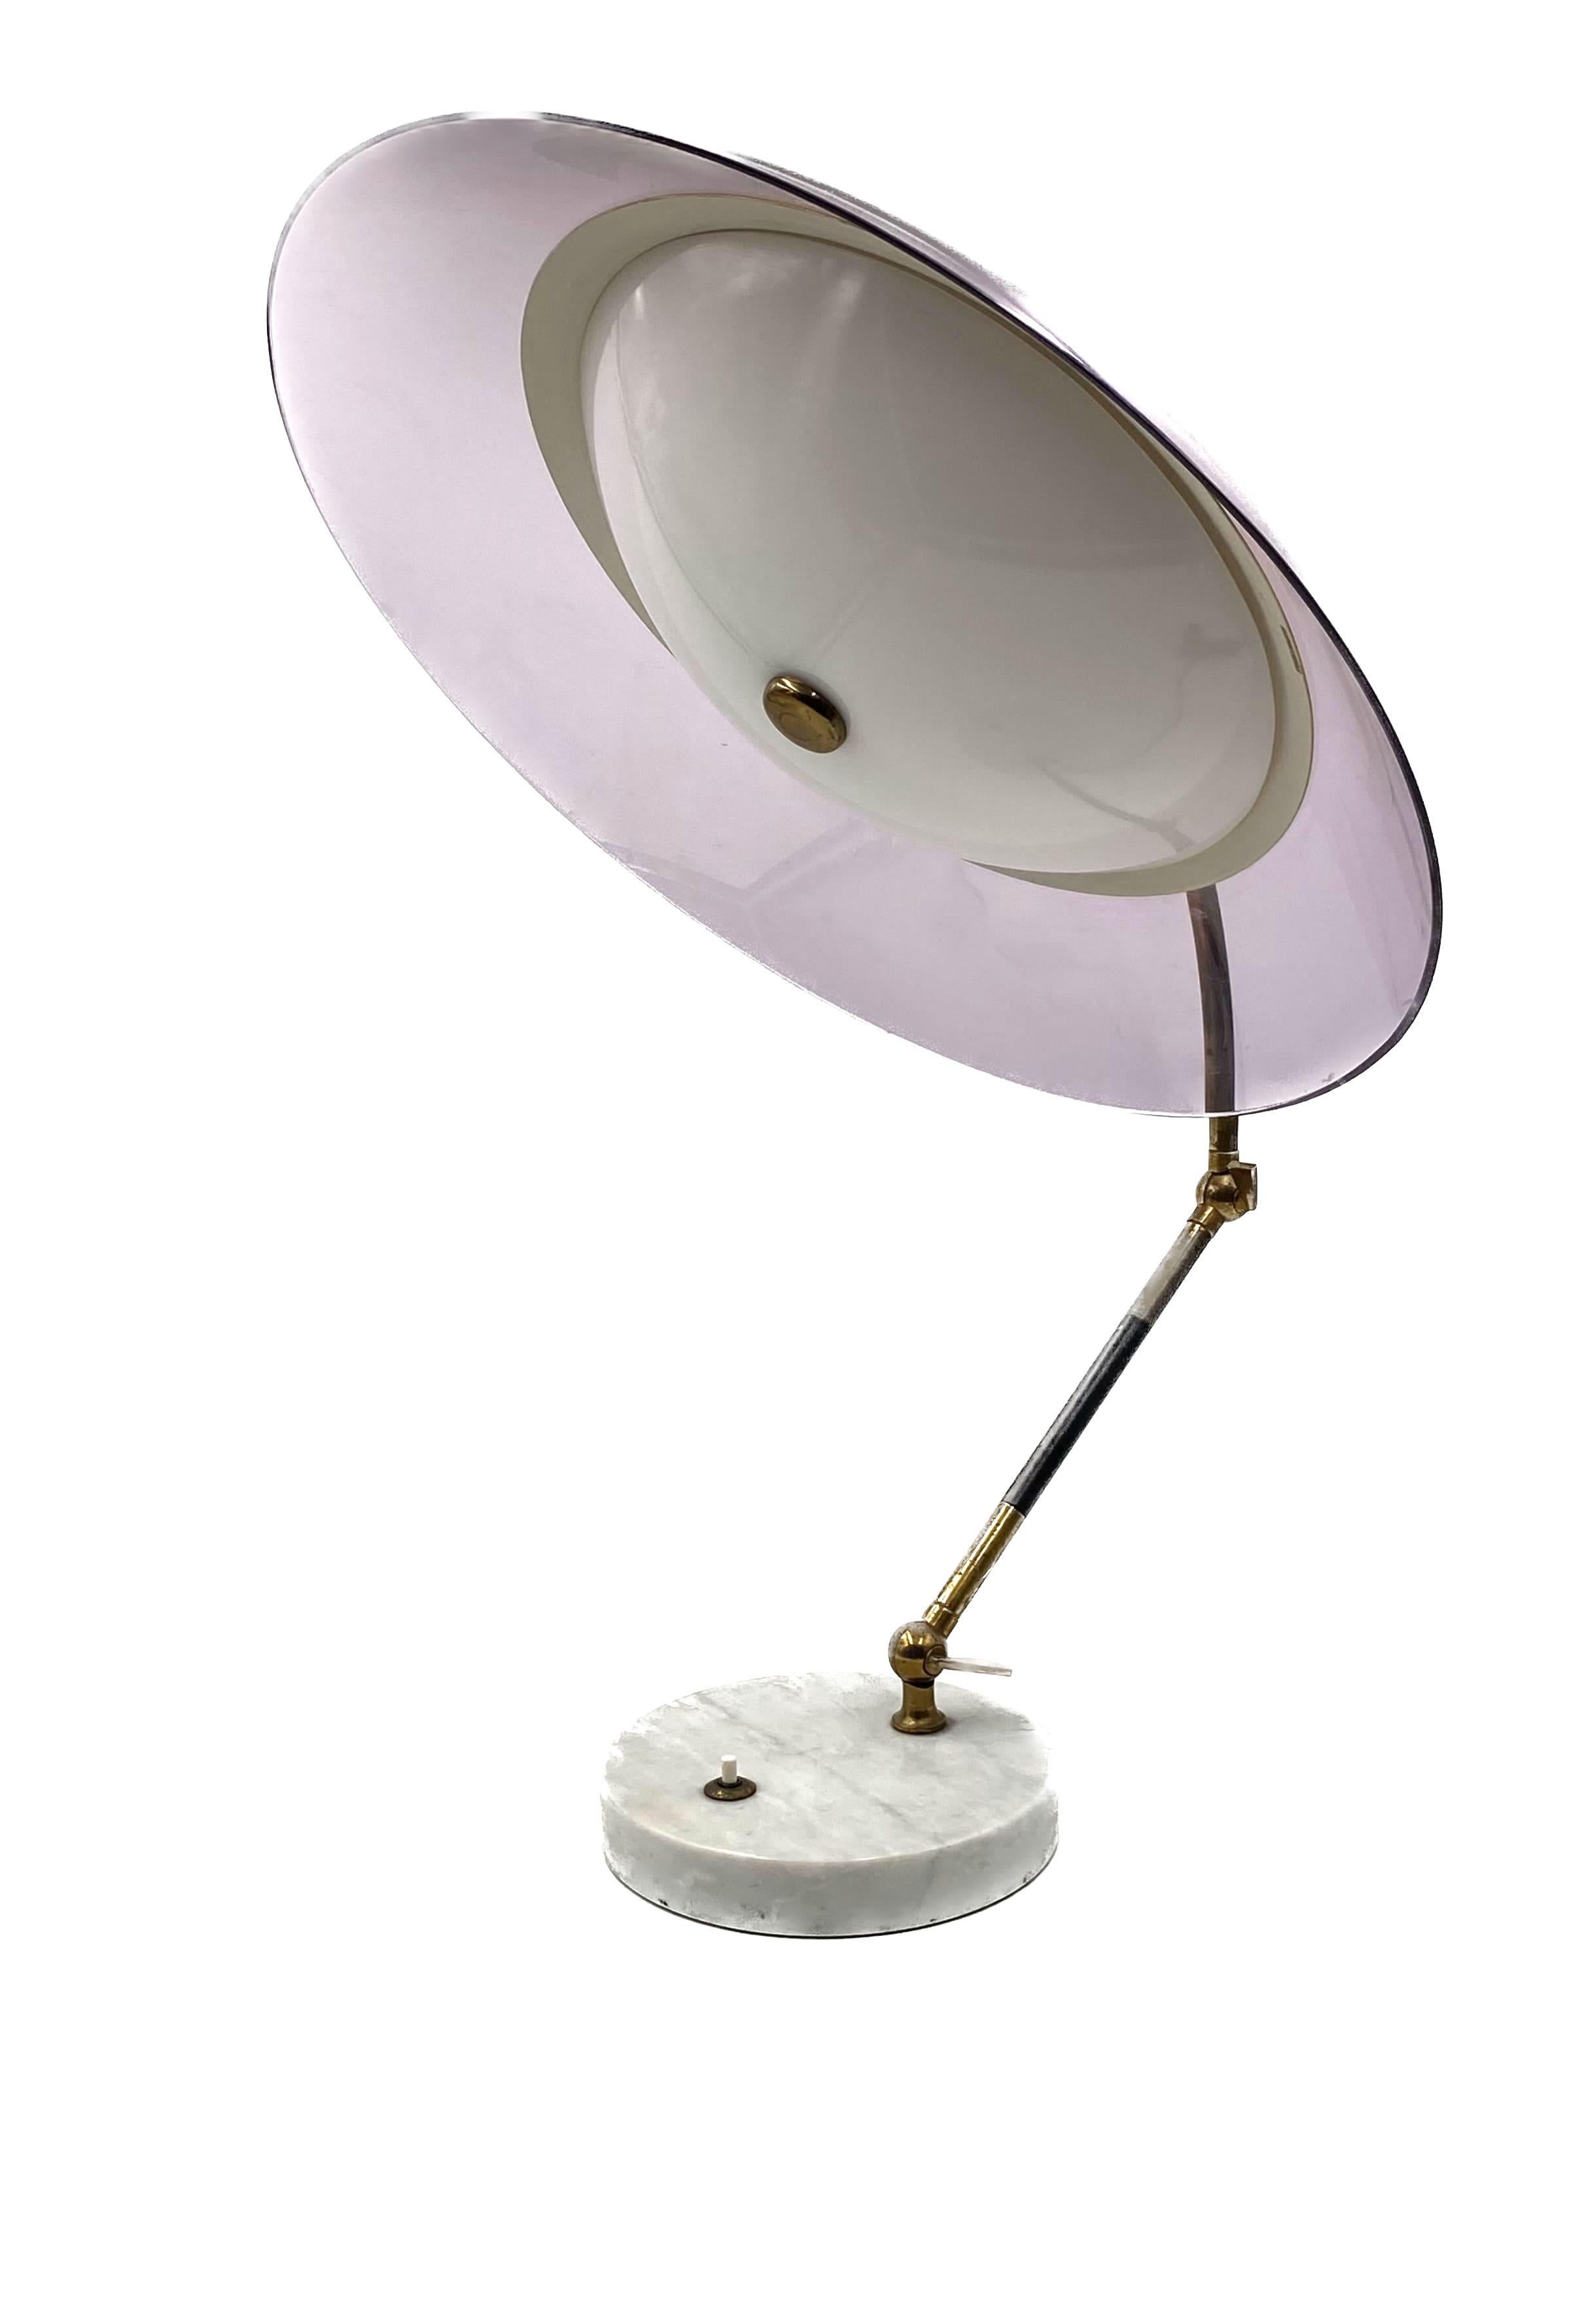 Stilux, mod. Orleans dome table lamp, Stilux Milano Italy, 1955 For Sale 12